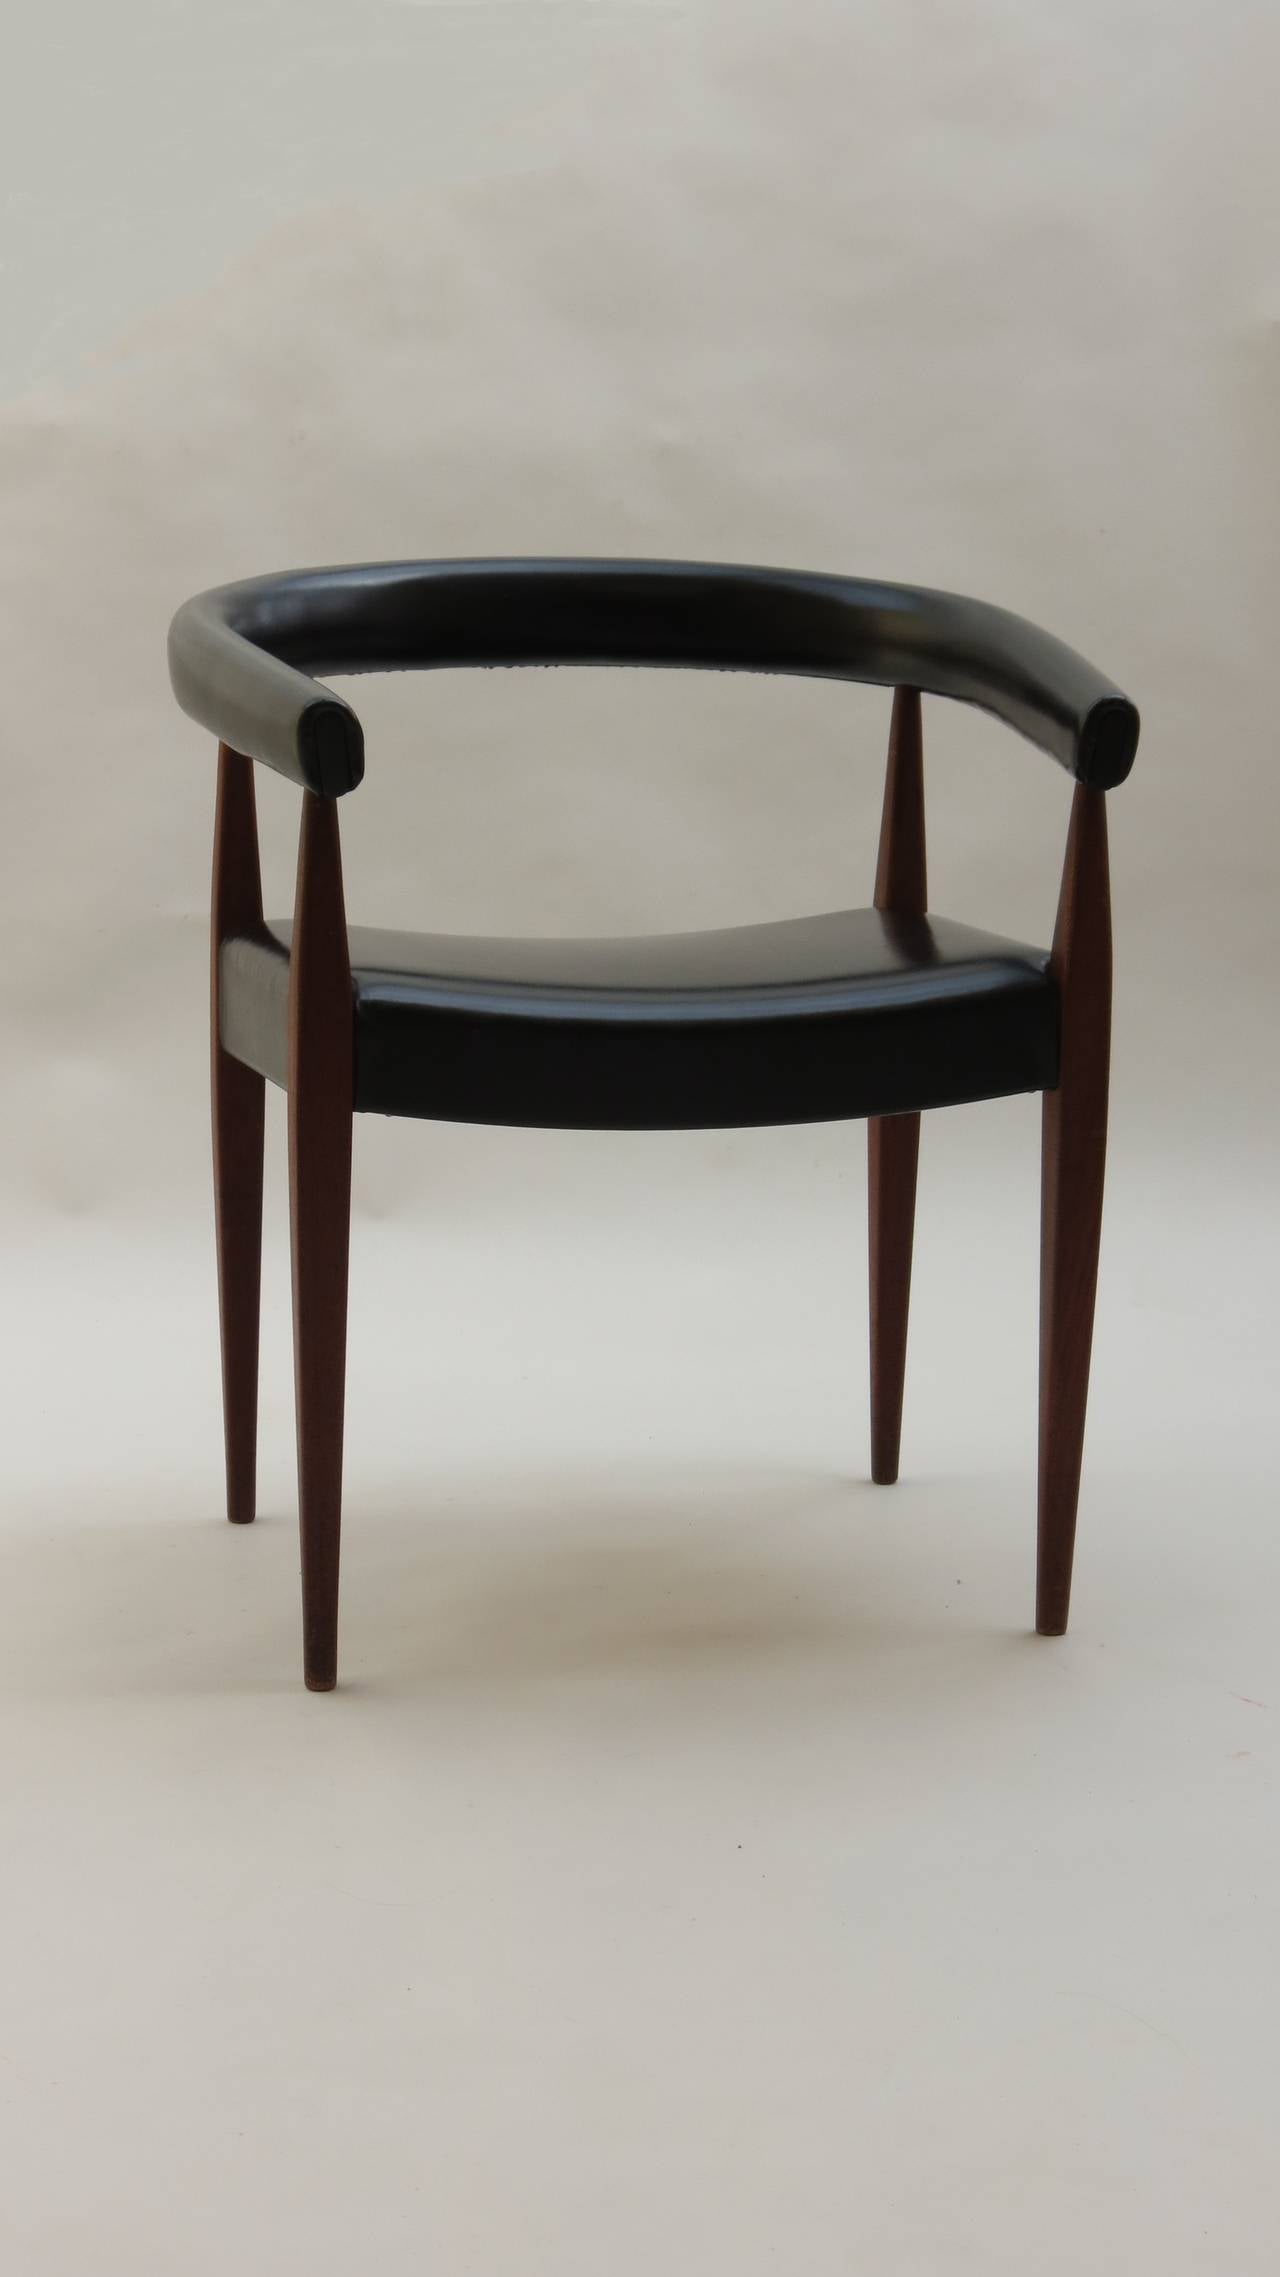 Offerd by Zitzo, Amsterdam: Rare Armchair by Nanna Ditzel, #114 for Kolds Savvaerk, Denmark. Solid teak legs and original black leatherette.

Shipping services: Ask for our competitive shipping quotes.